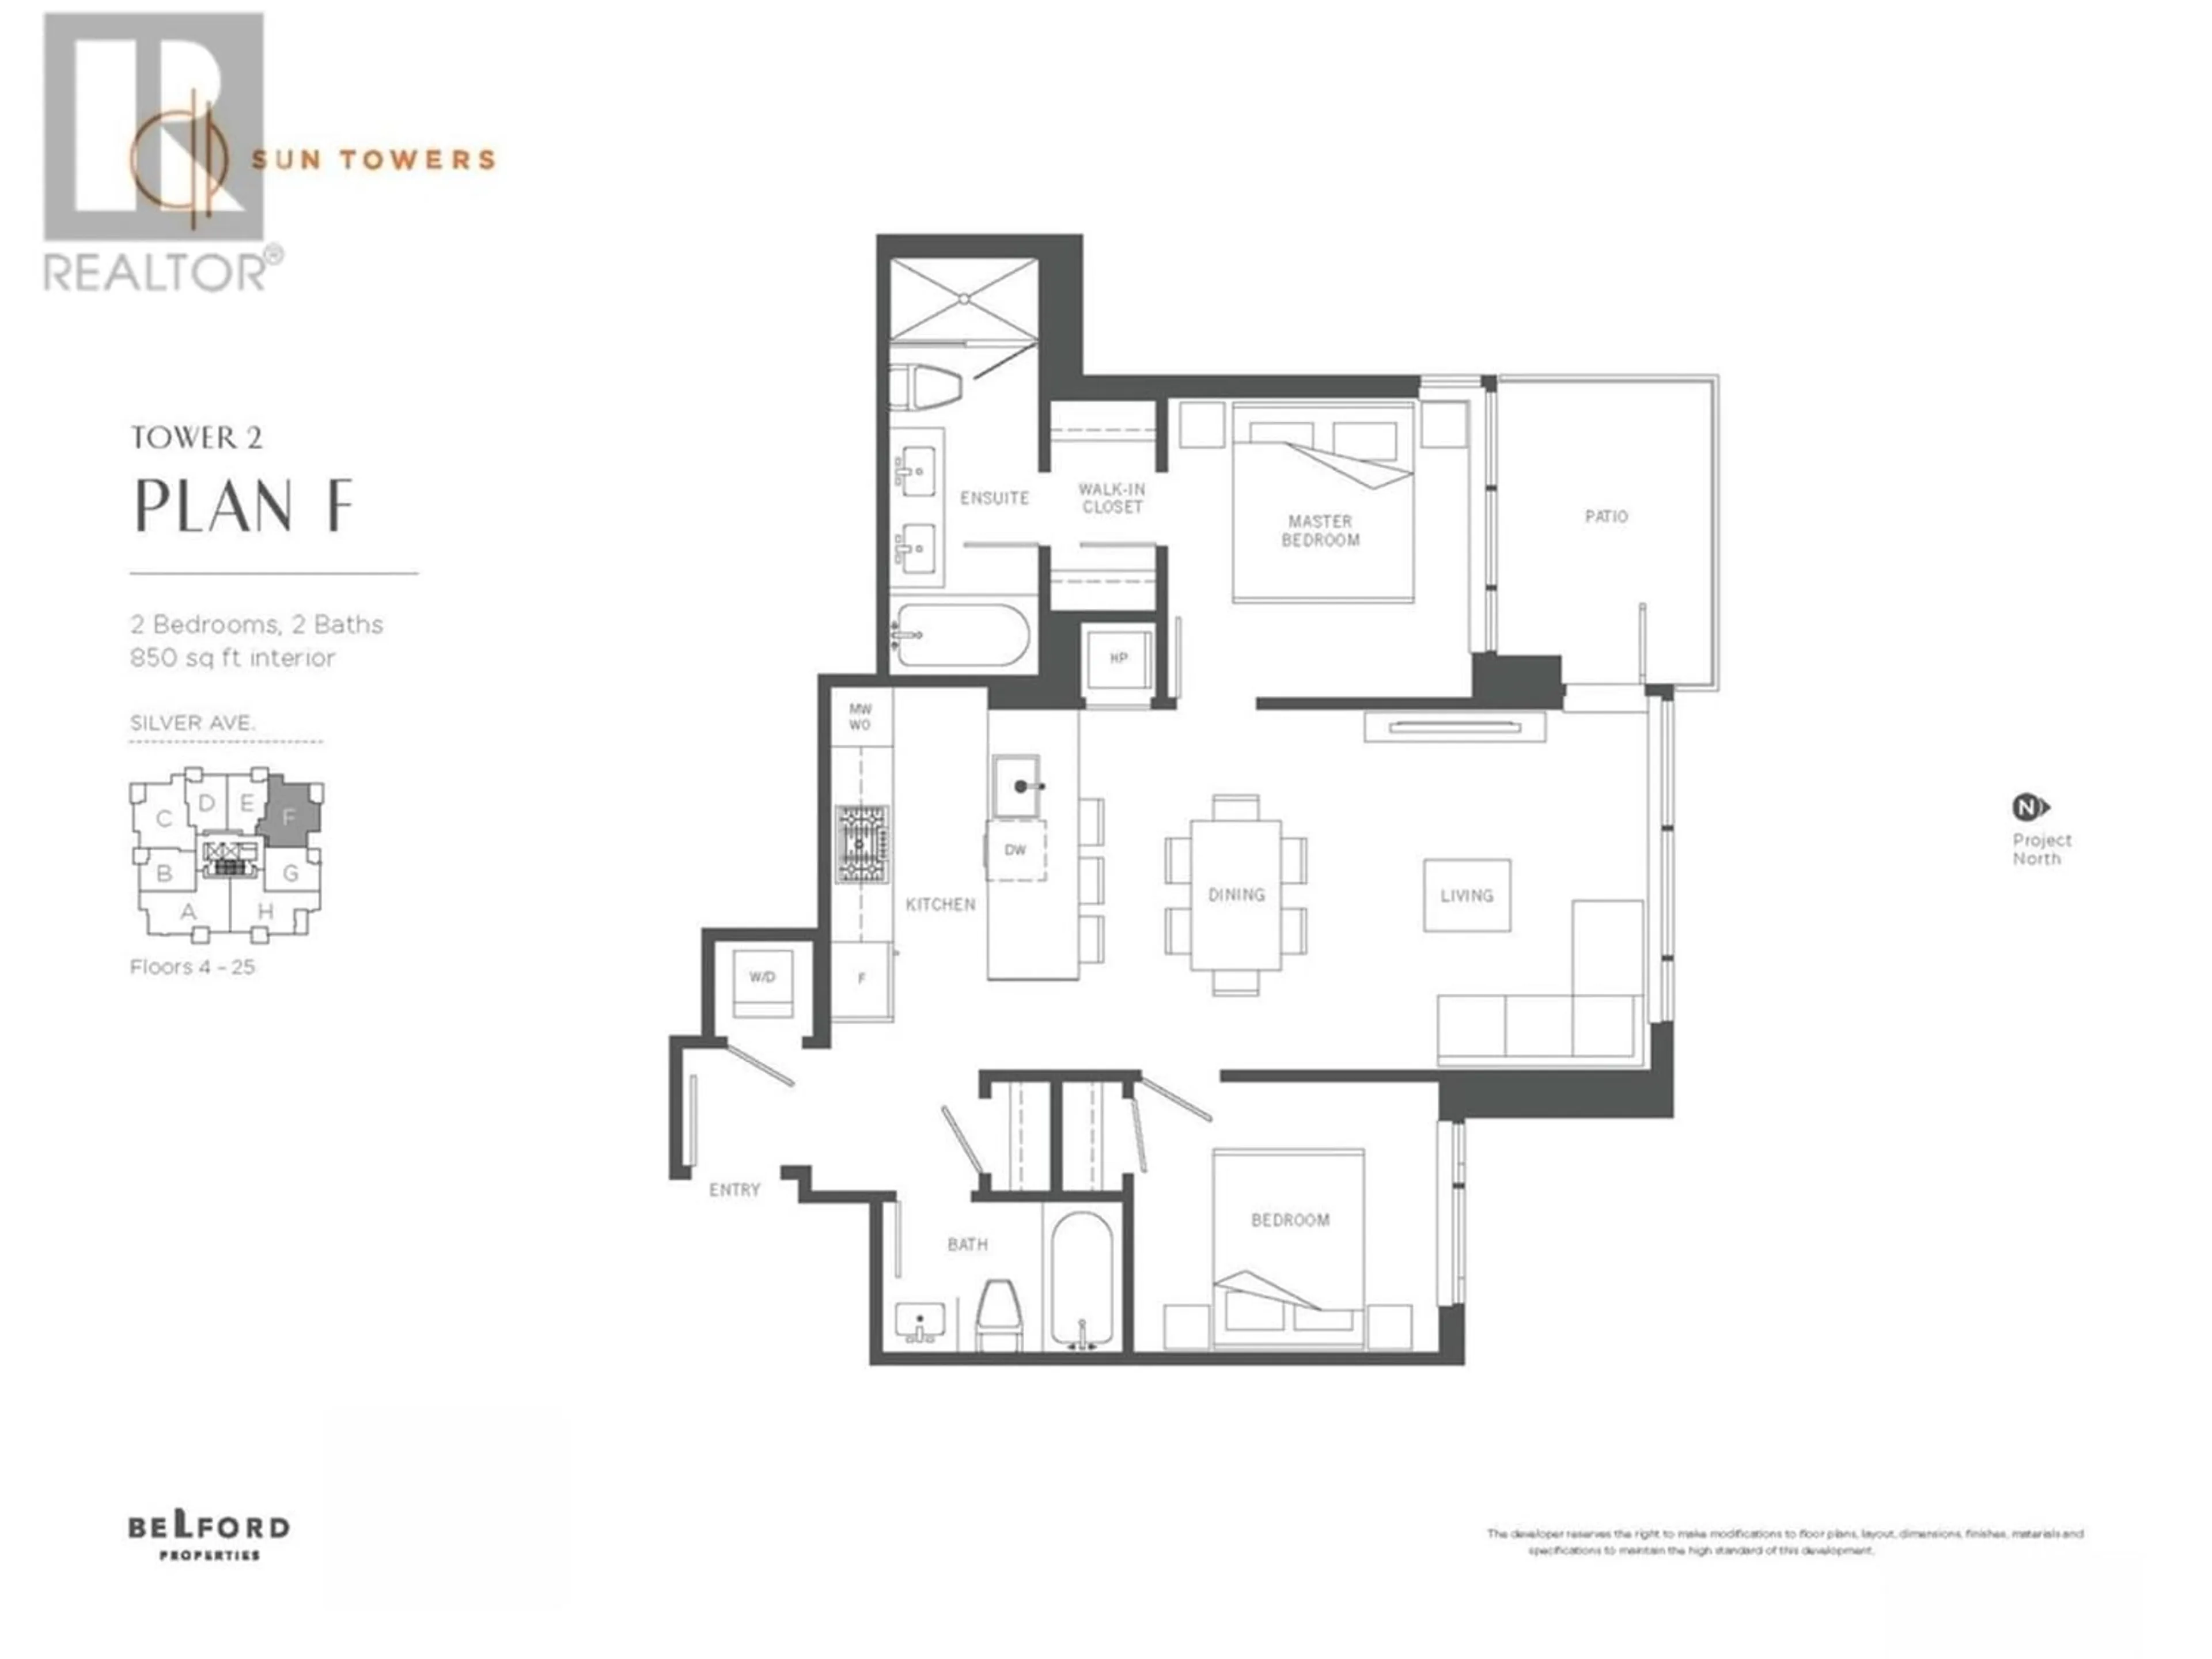 Floor plan for 506 6398 SILVER AVENUE, Burnaby British Columbia V5H0K7